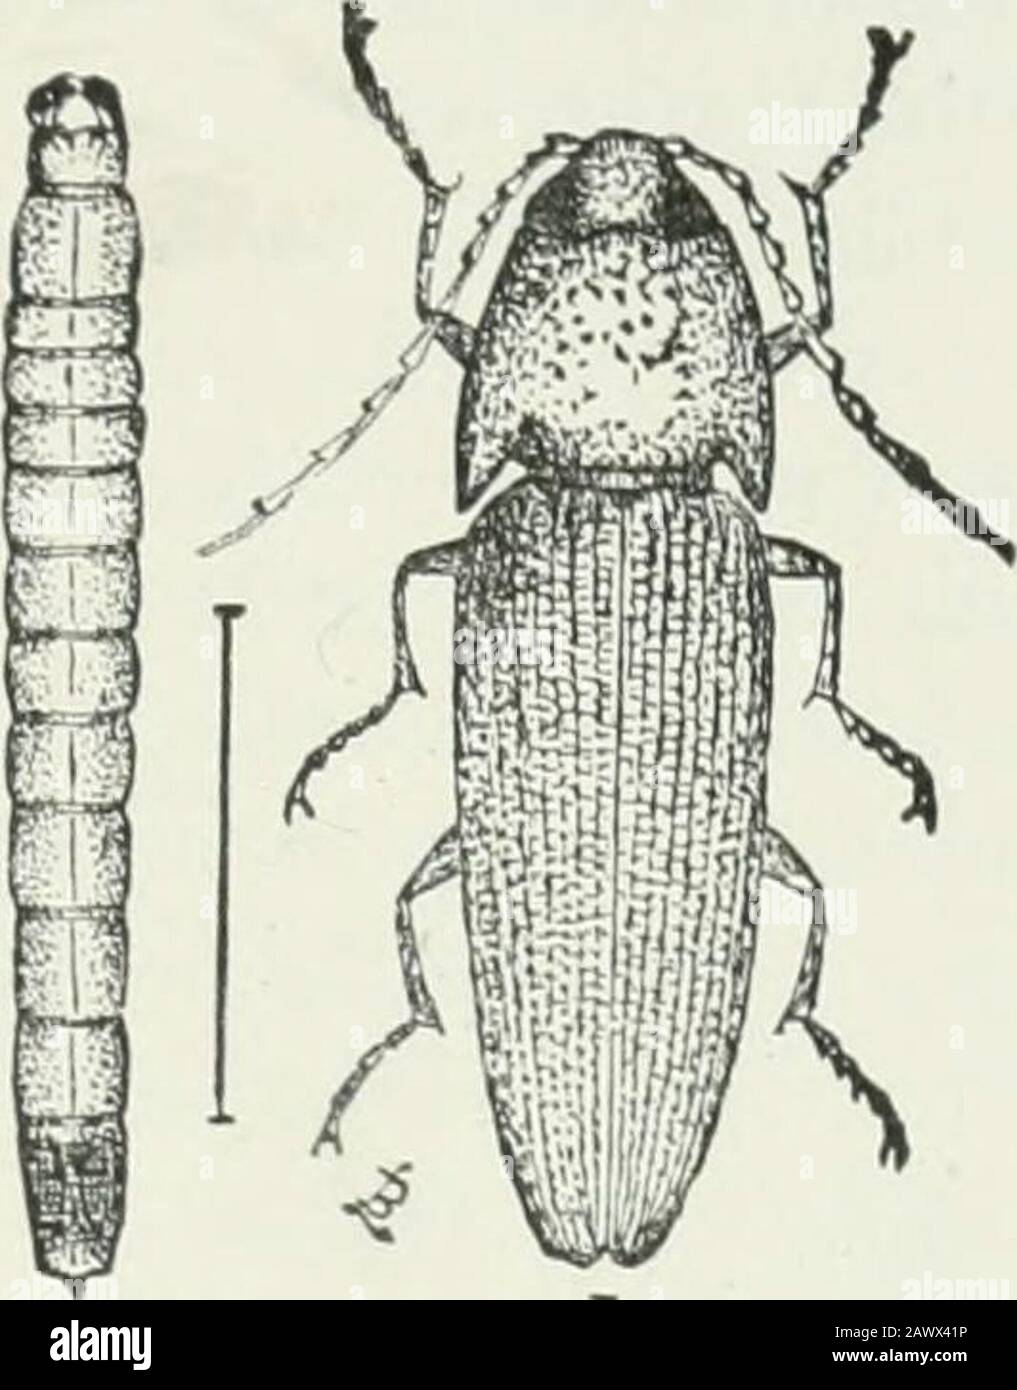 Economic entomology for the farmer and fruit-grower : and for use as a text-book in agricultural schools and colleges . XL i Fig. 165, the eyed Elater, Alaus oculatus. Fig. 166, wood-boring wire-worm, from side-Fig. 167, a, larva; b, adult click-beetle. feeds in decaying wood, the other underground on the roots ofplants ; of these the first may be left out of consideration alto-gether, though in it may be found the species of Alaus, ourlargest and most prominent forms. The history of the subterra-nean species is in general as follows : The beetles appear quiteearly in spring, and may be notice Stock Photo